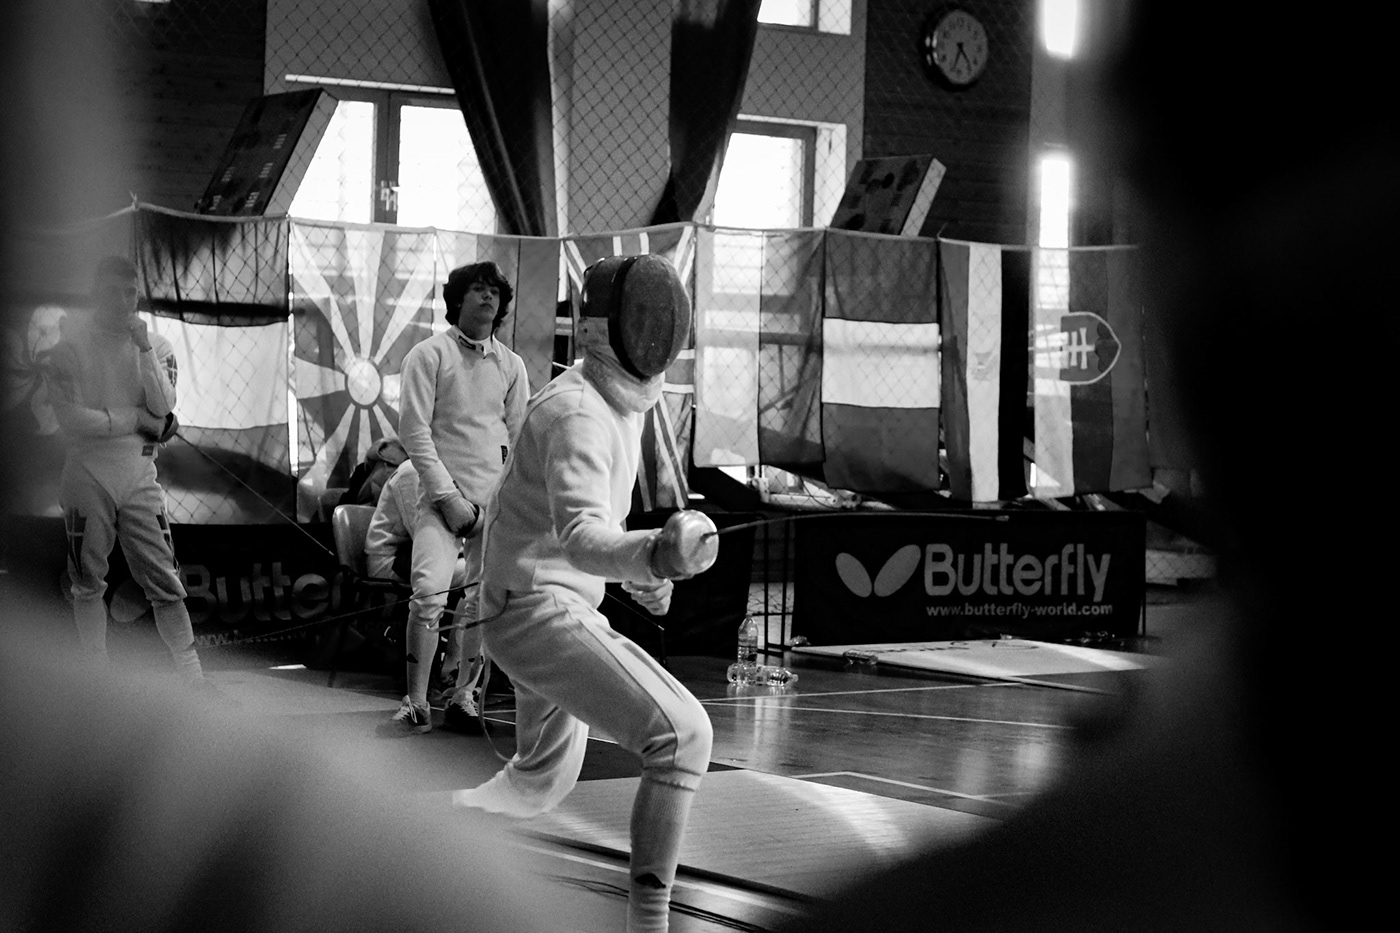 fencing sports epee Competition Eurocup sport escrime